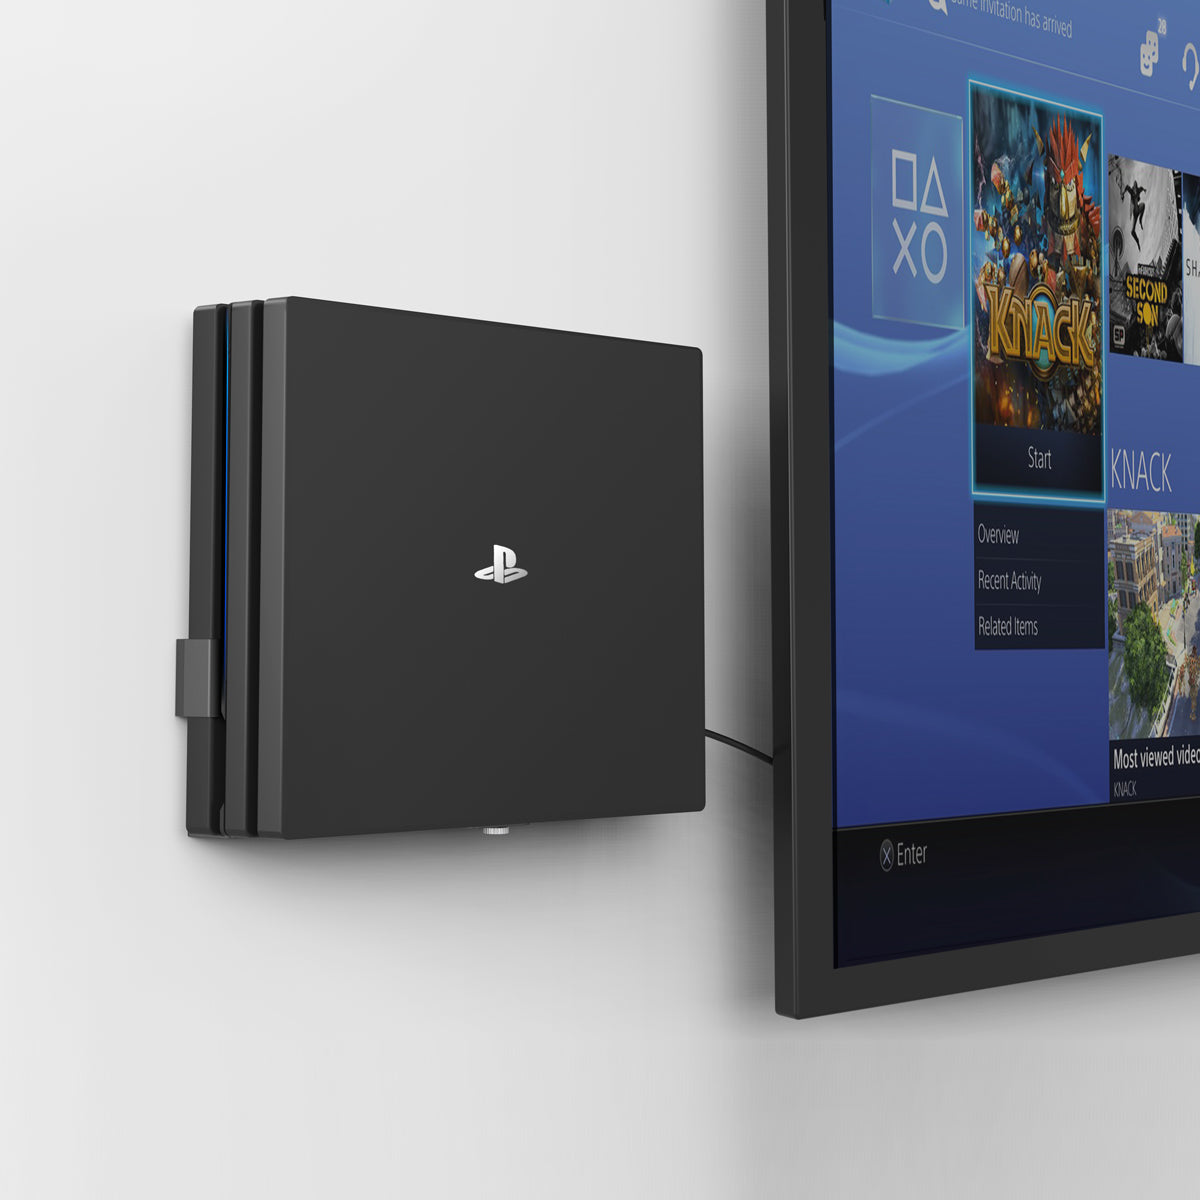 ps4 on the wall